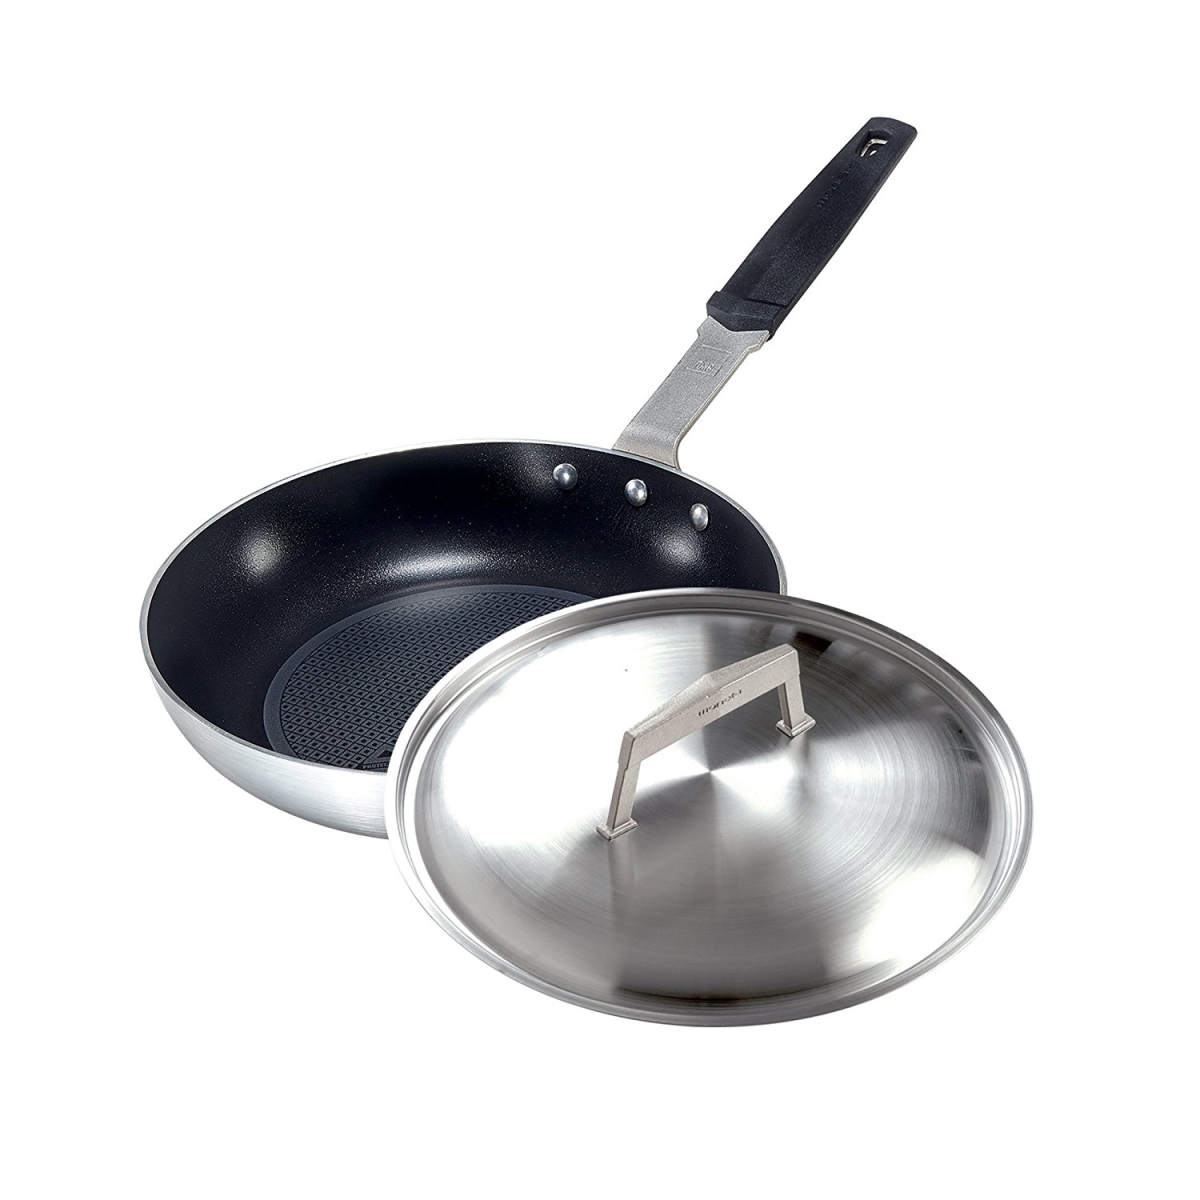 6080124l 10 In. Pro Protection Base Fry Pan With Lid